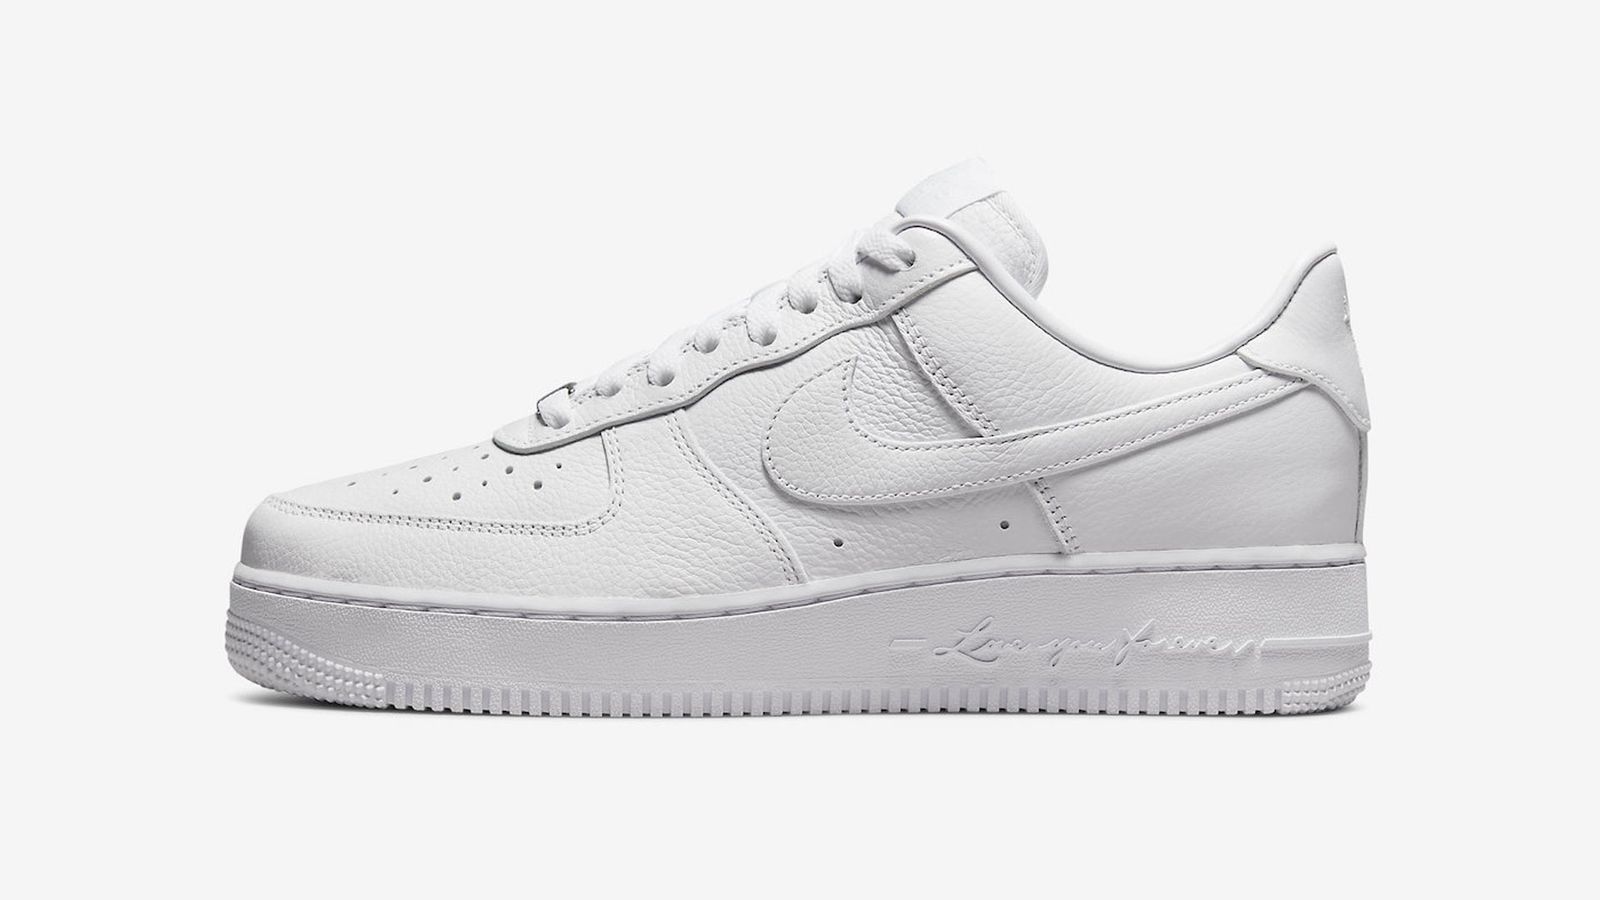 NOCTA x Nike Air Force 1 OUT NOW: Release date, price, where to buy